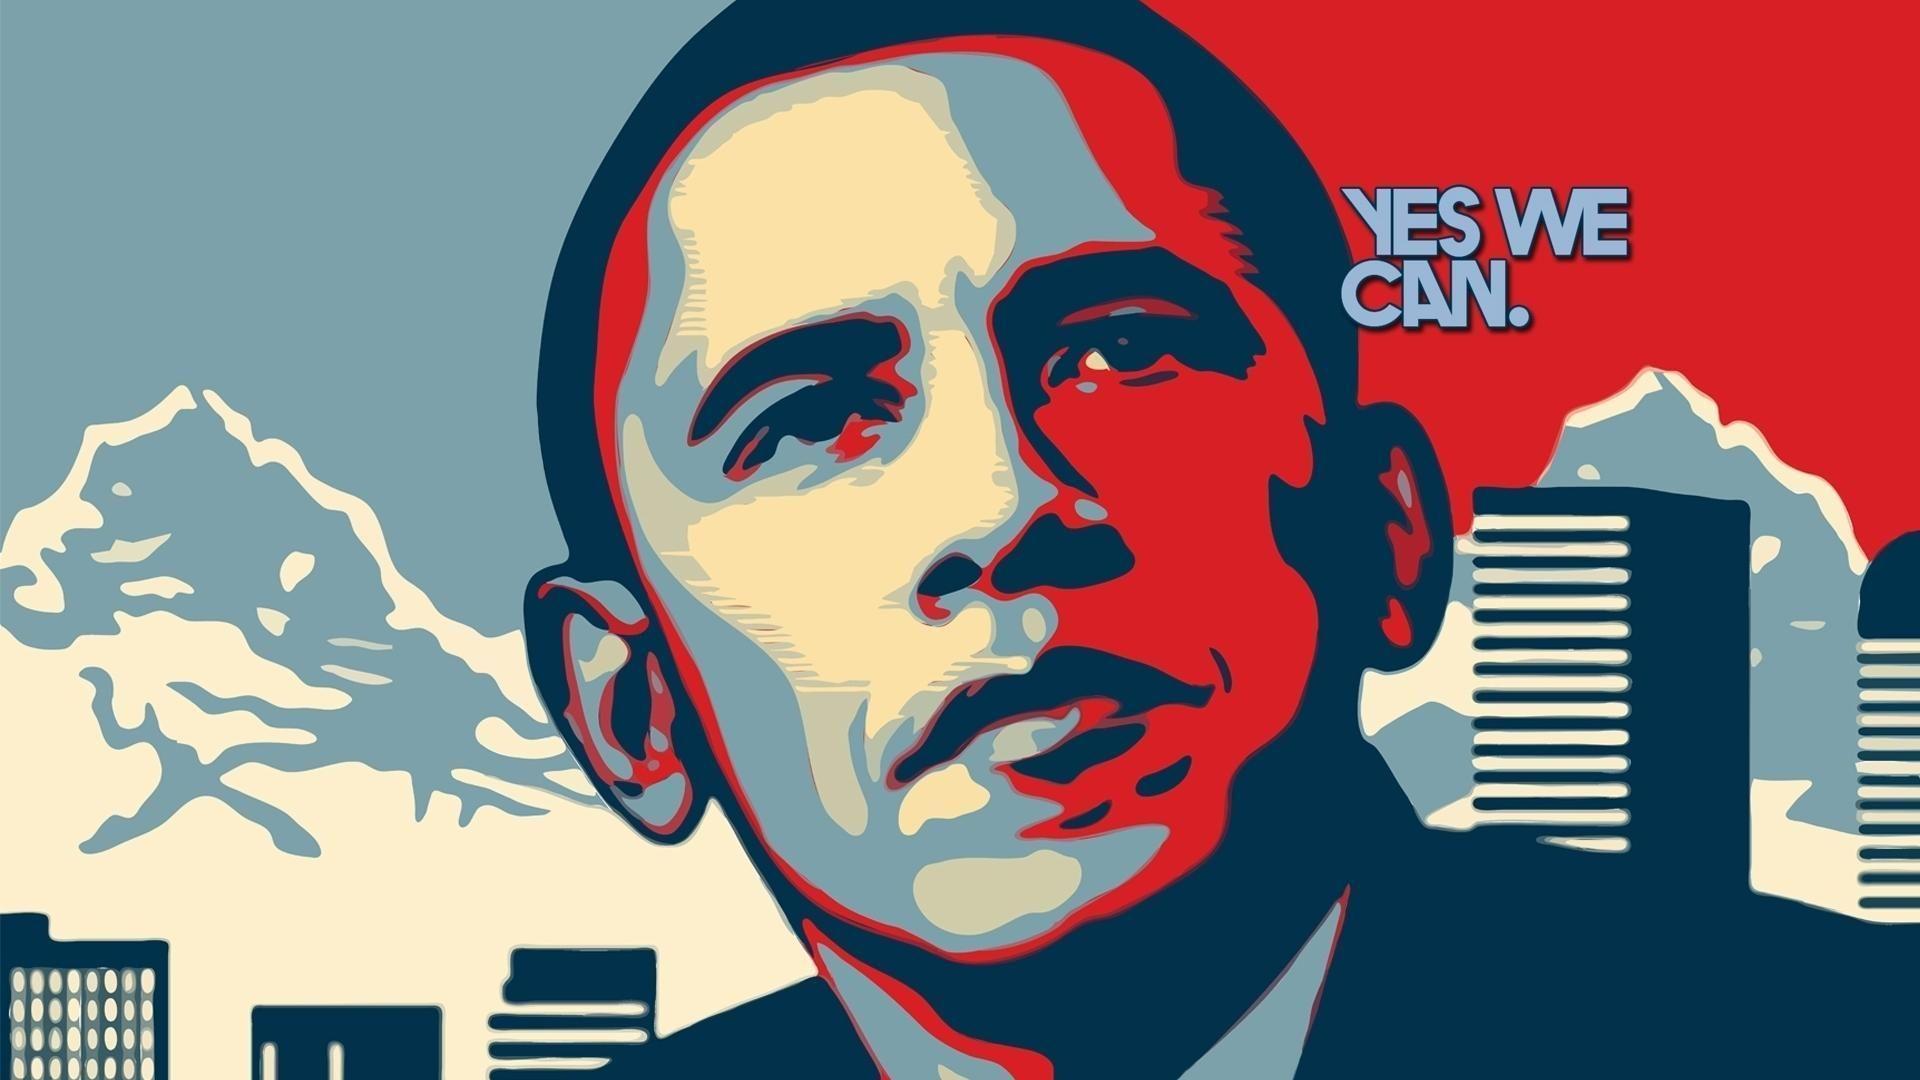 Michael Wilson Blog. Yes We Can Admire Barack Obama!